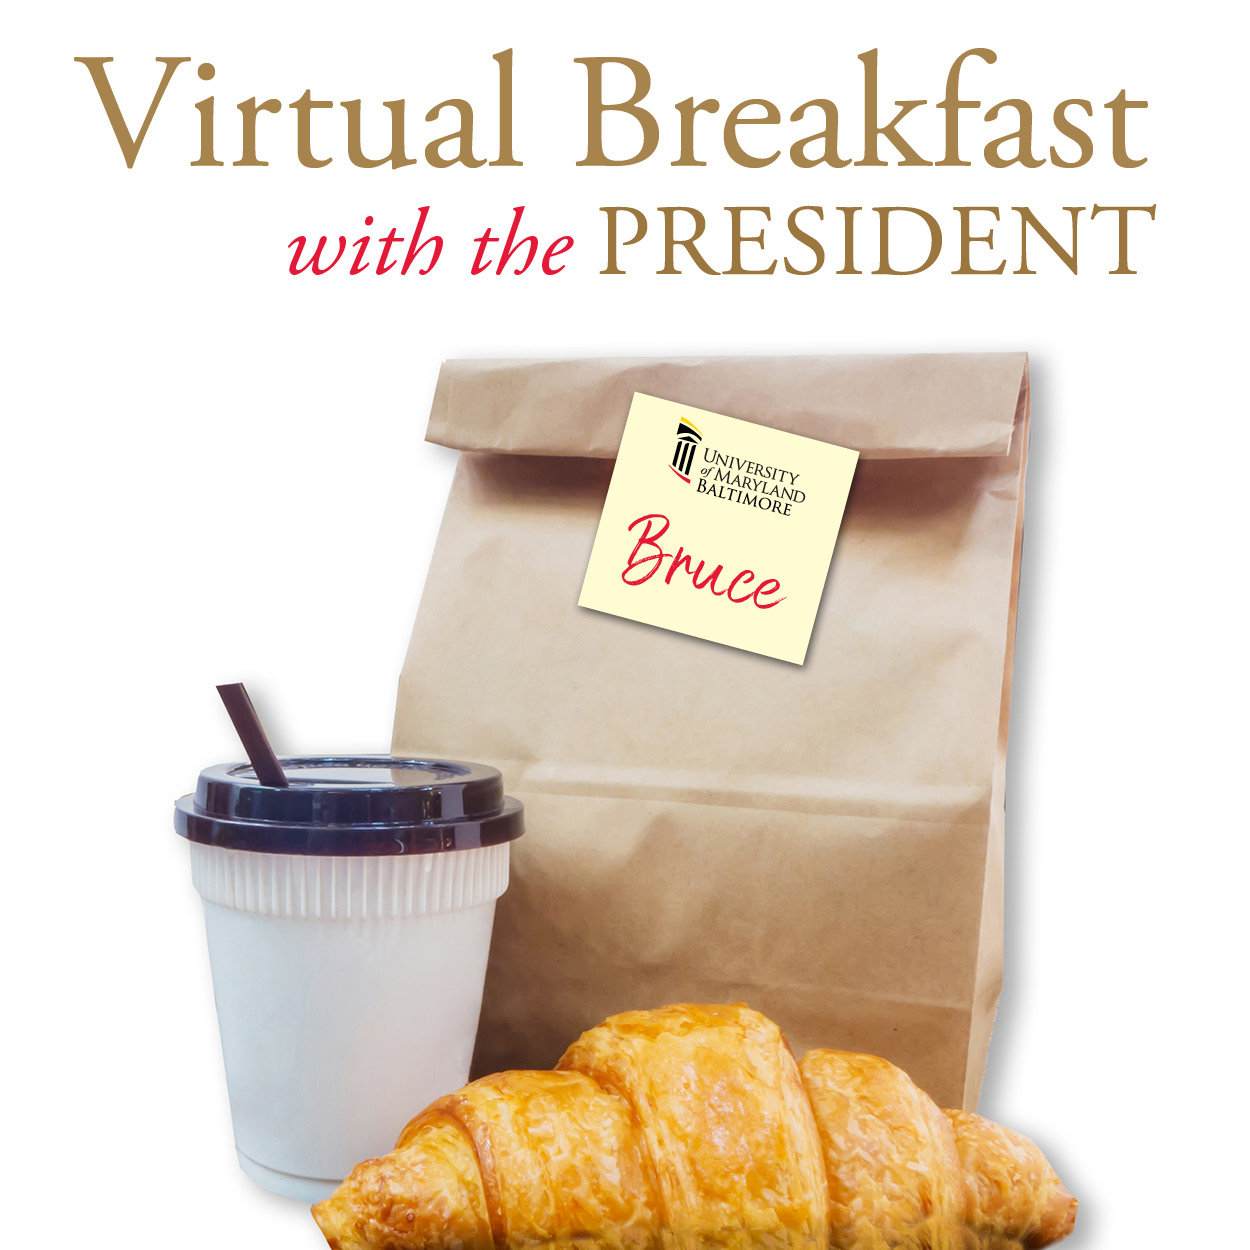 Virtual Breakfast with the President